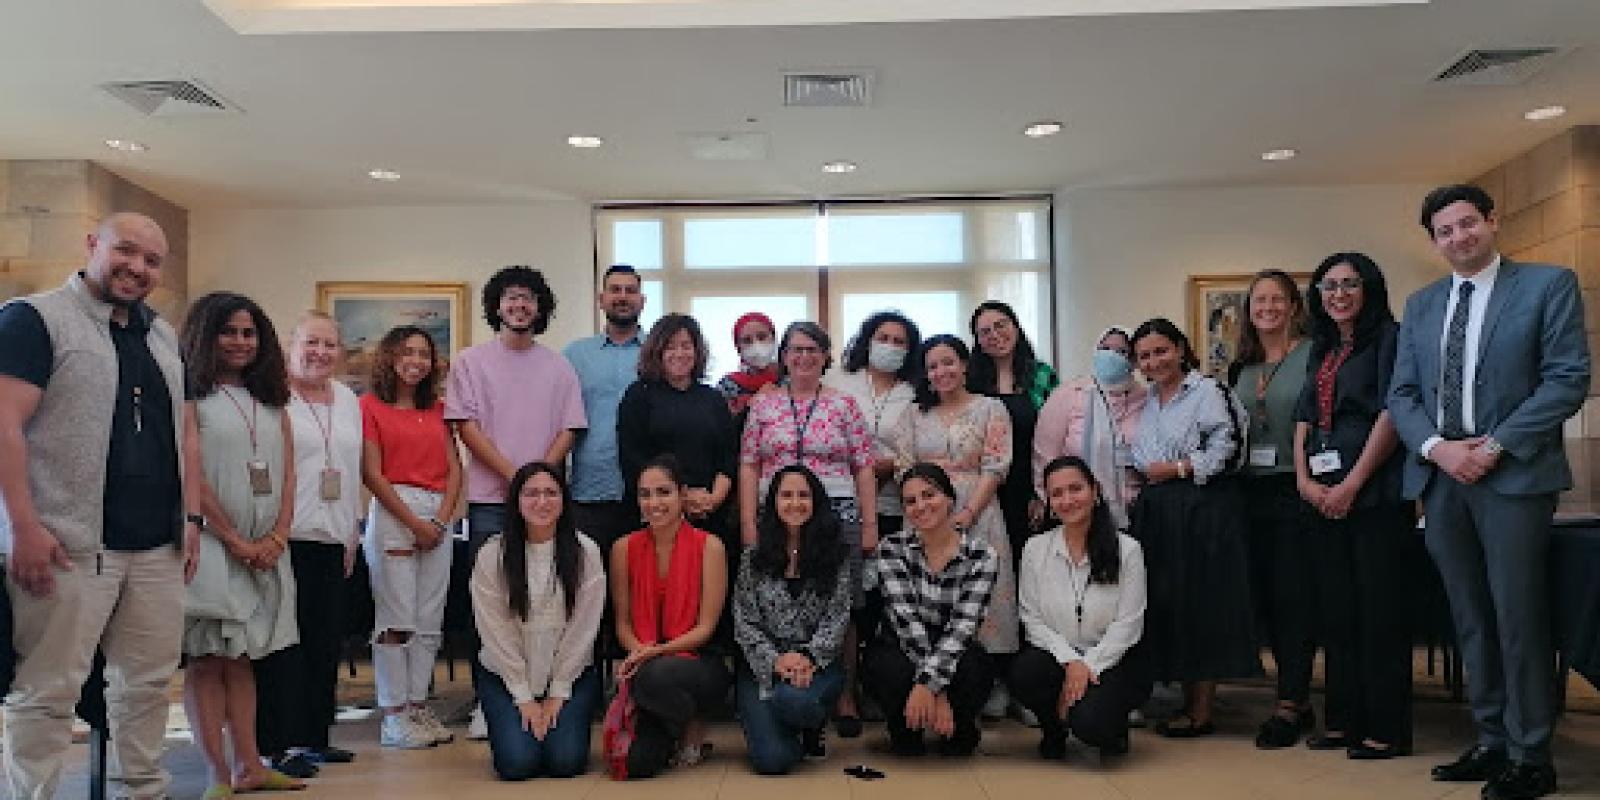 AUC's Gender Policy Working Group